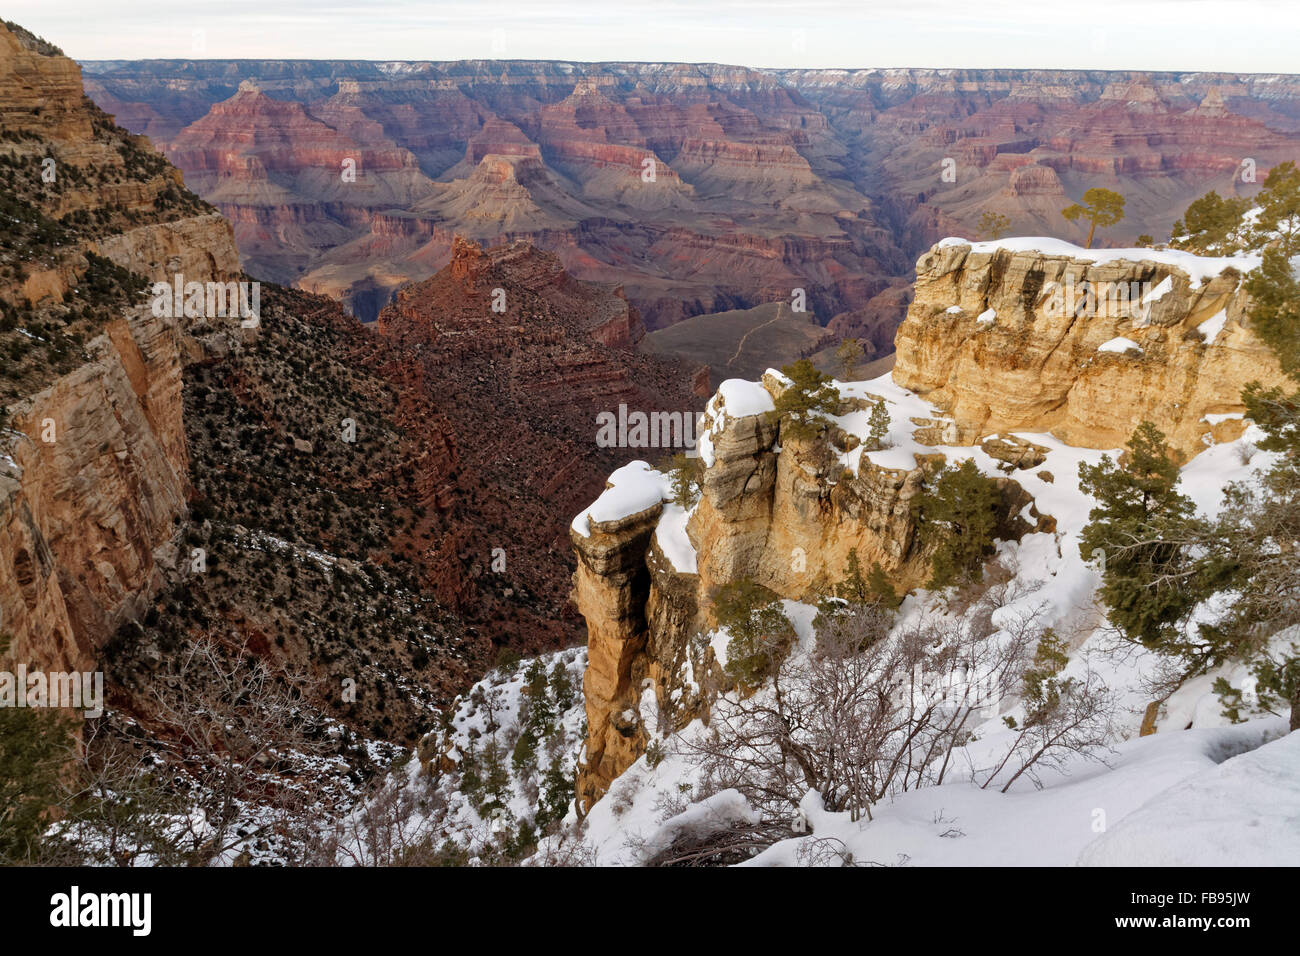 The magnificence of the Grand Canyon, America's natural wonder. photo by Trevor Collens Stock Photo